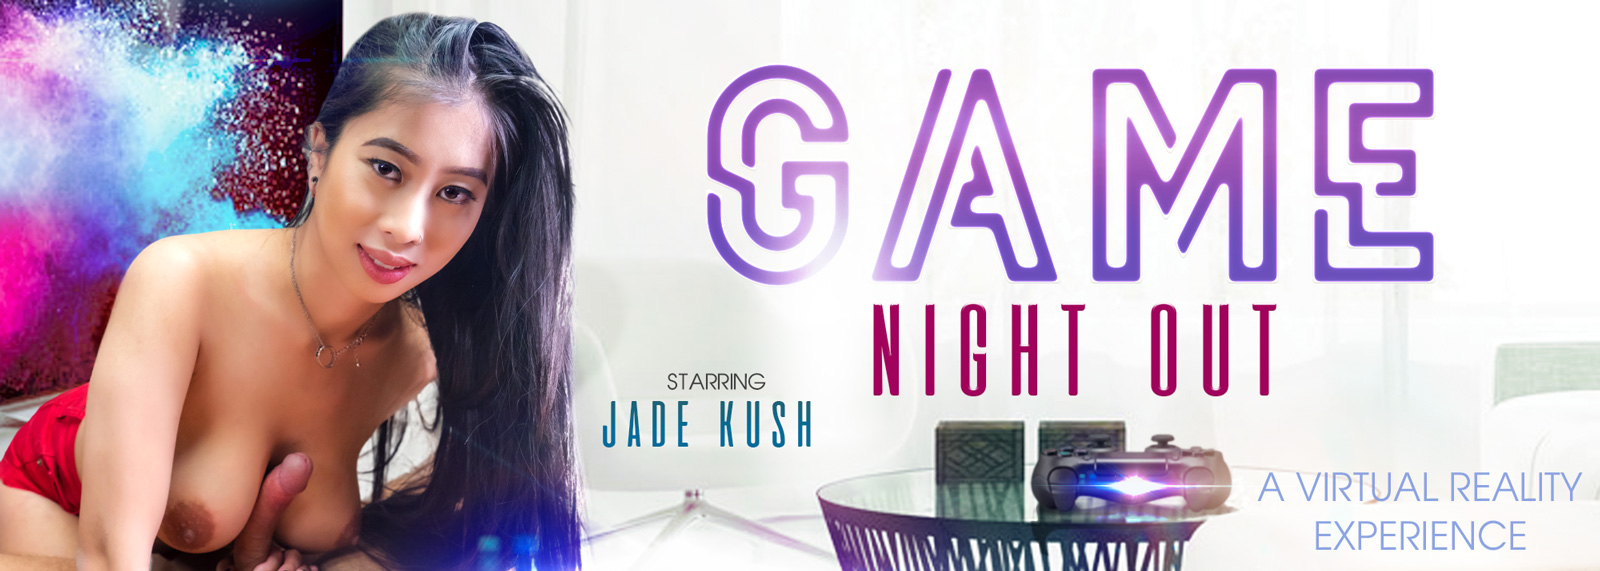 Game Night Out - VR Porn Video, Starring: Jade Kush